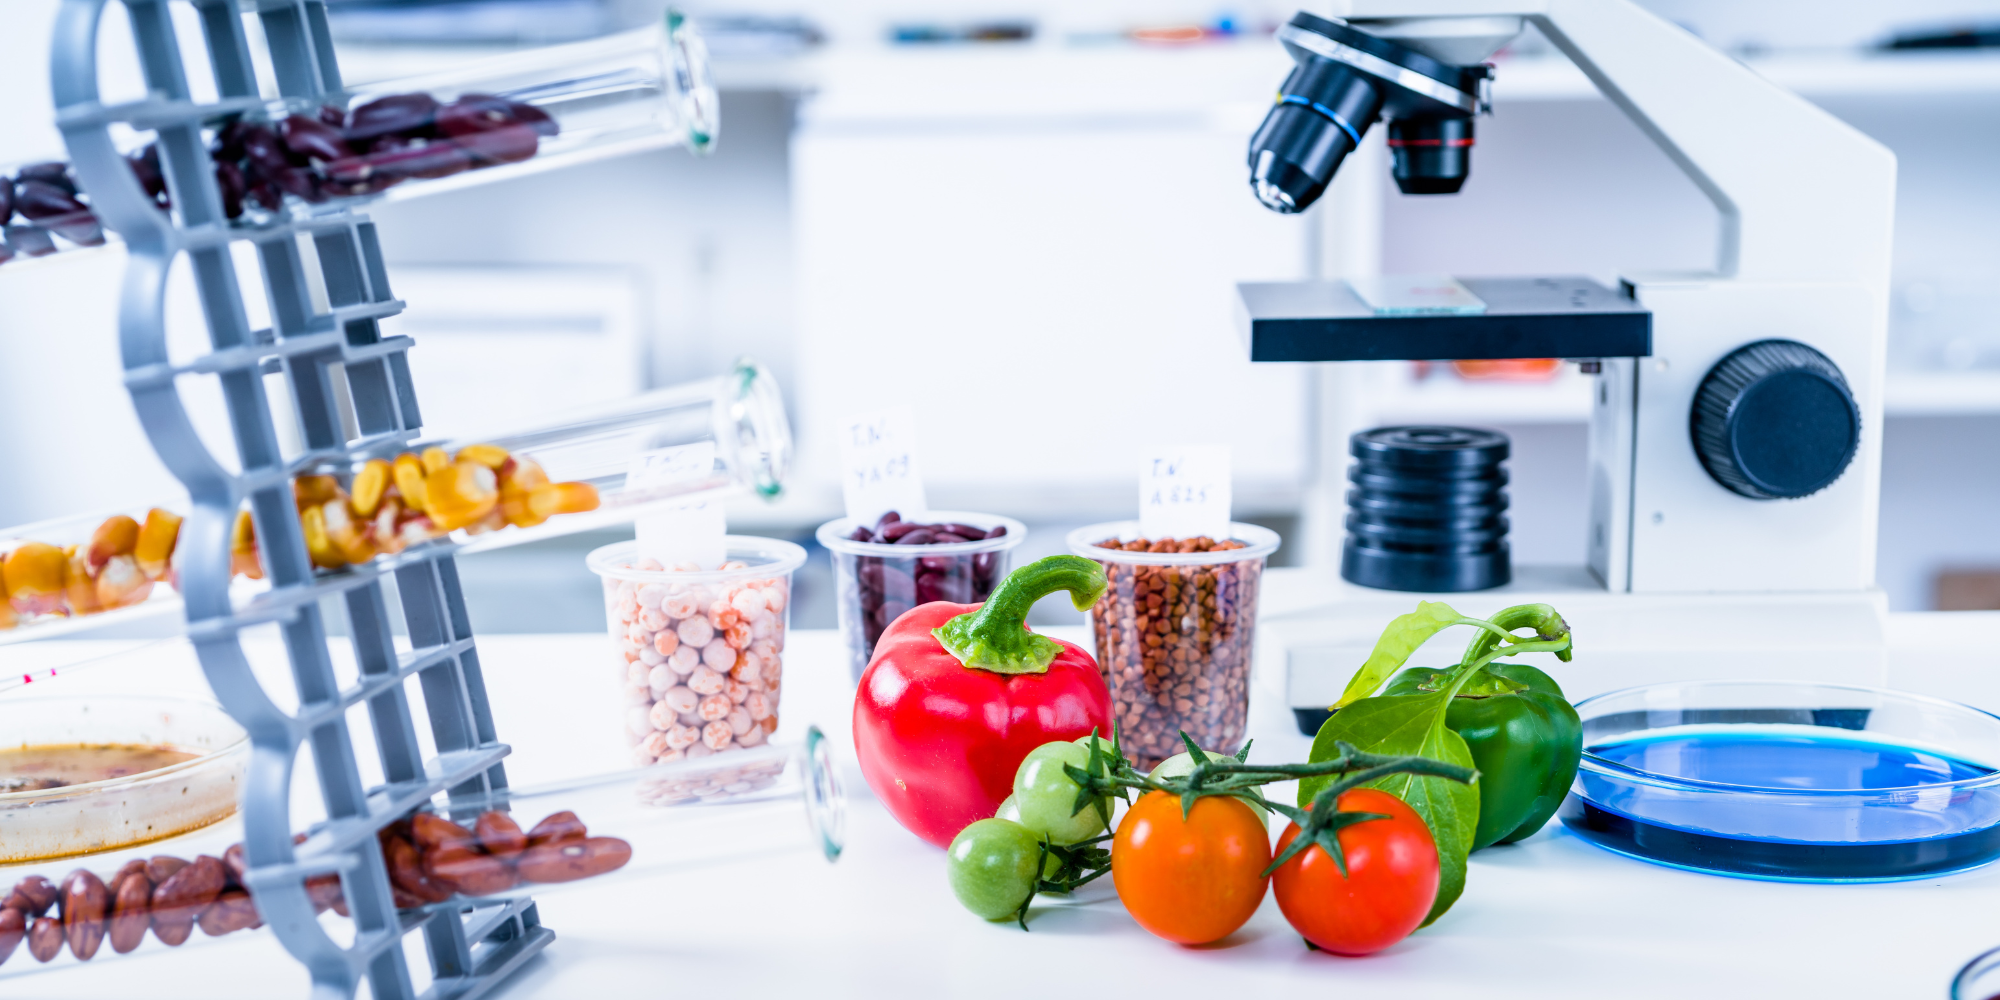 On the counter of an all white science lab are different vegetables and legumes (tomatoes on the vine, a red bell pepper, white, brown and black beans in transparent cups) in the background, there is a while and black microscope